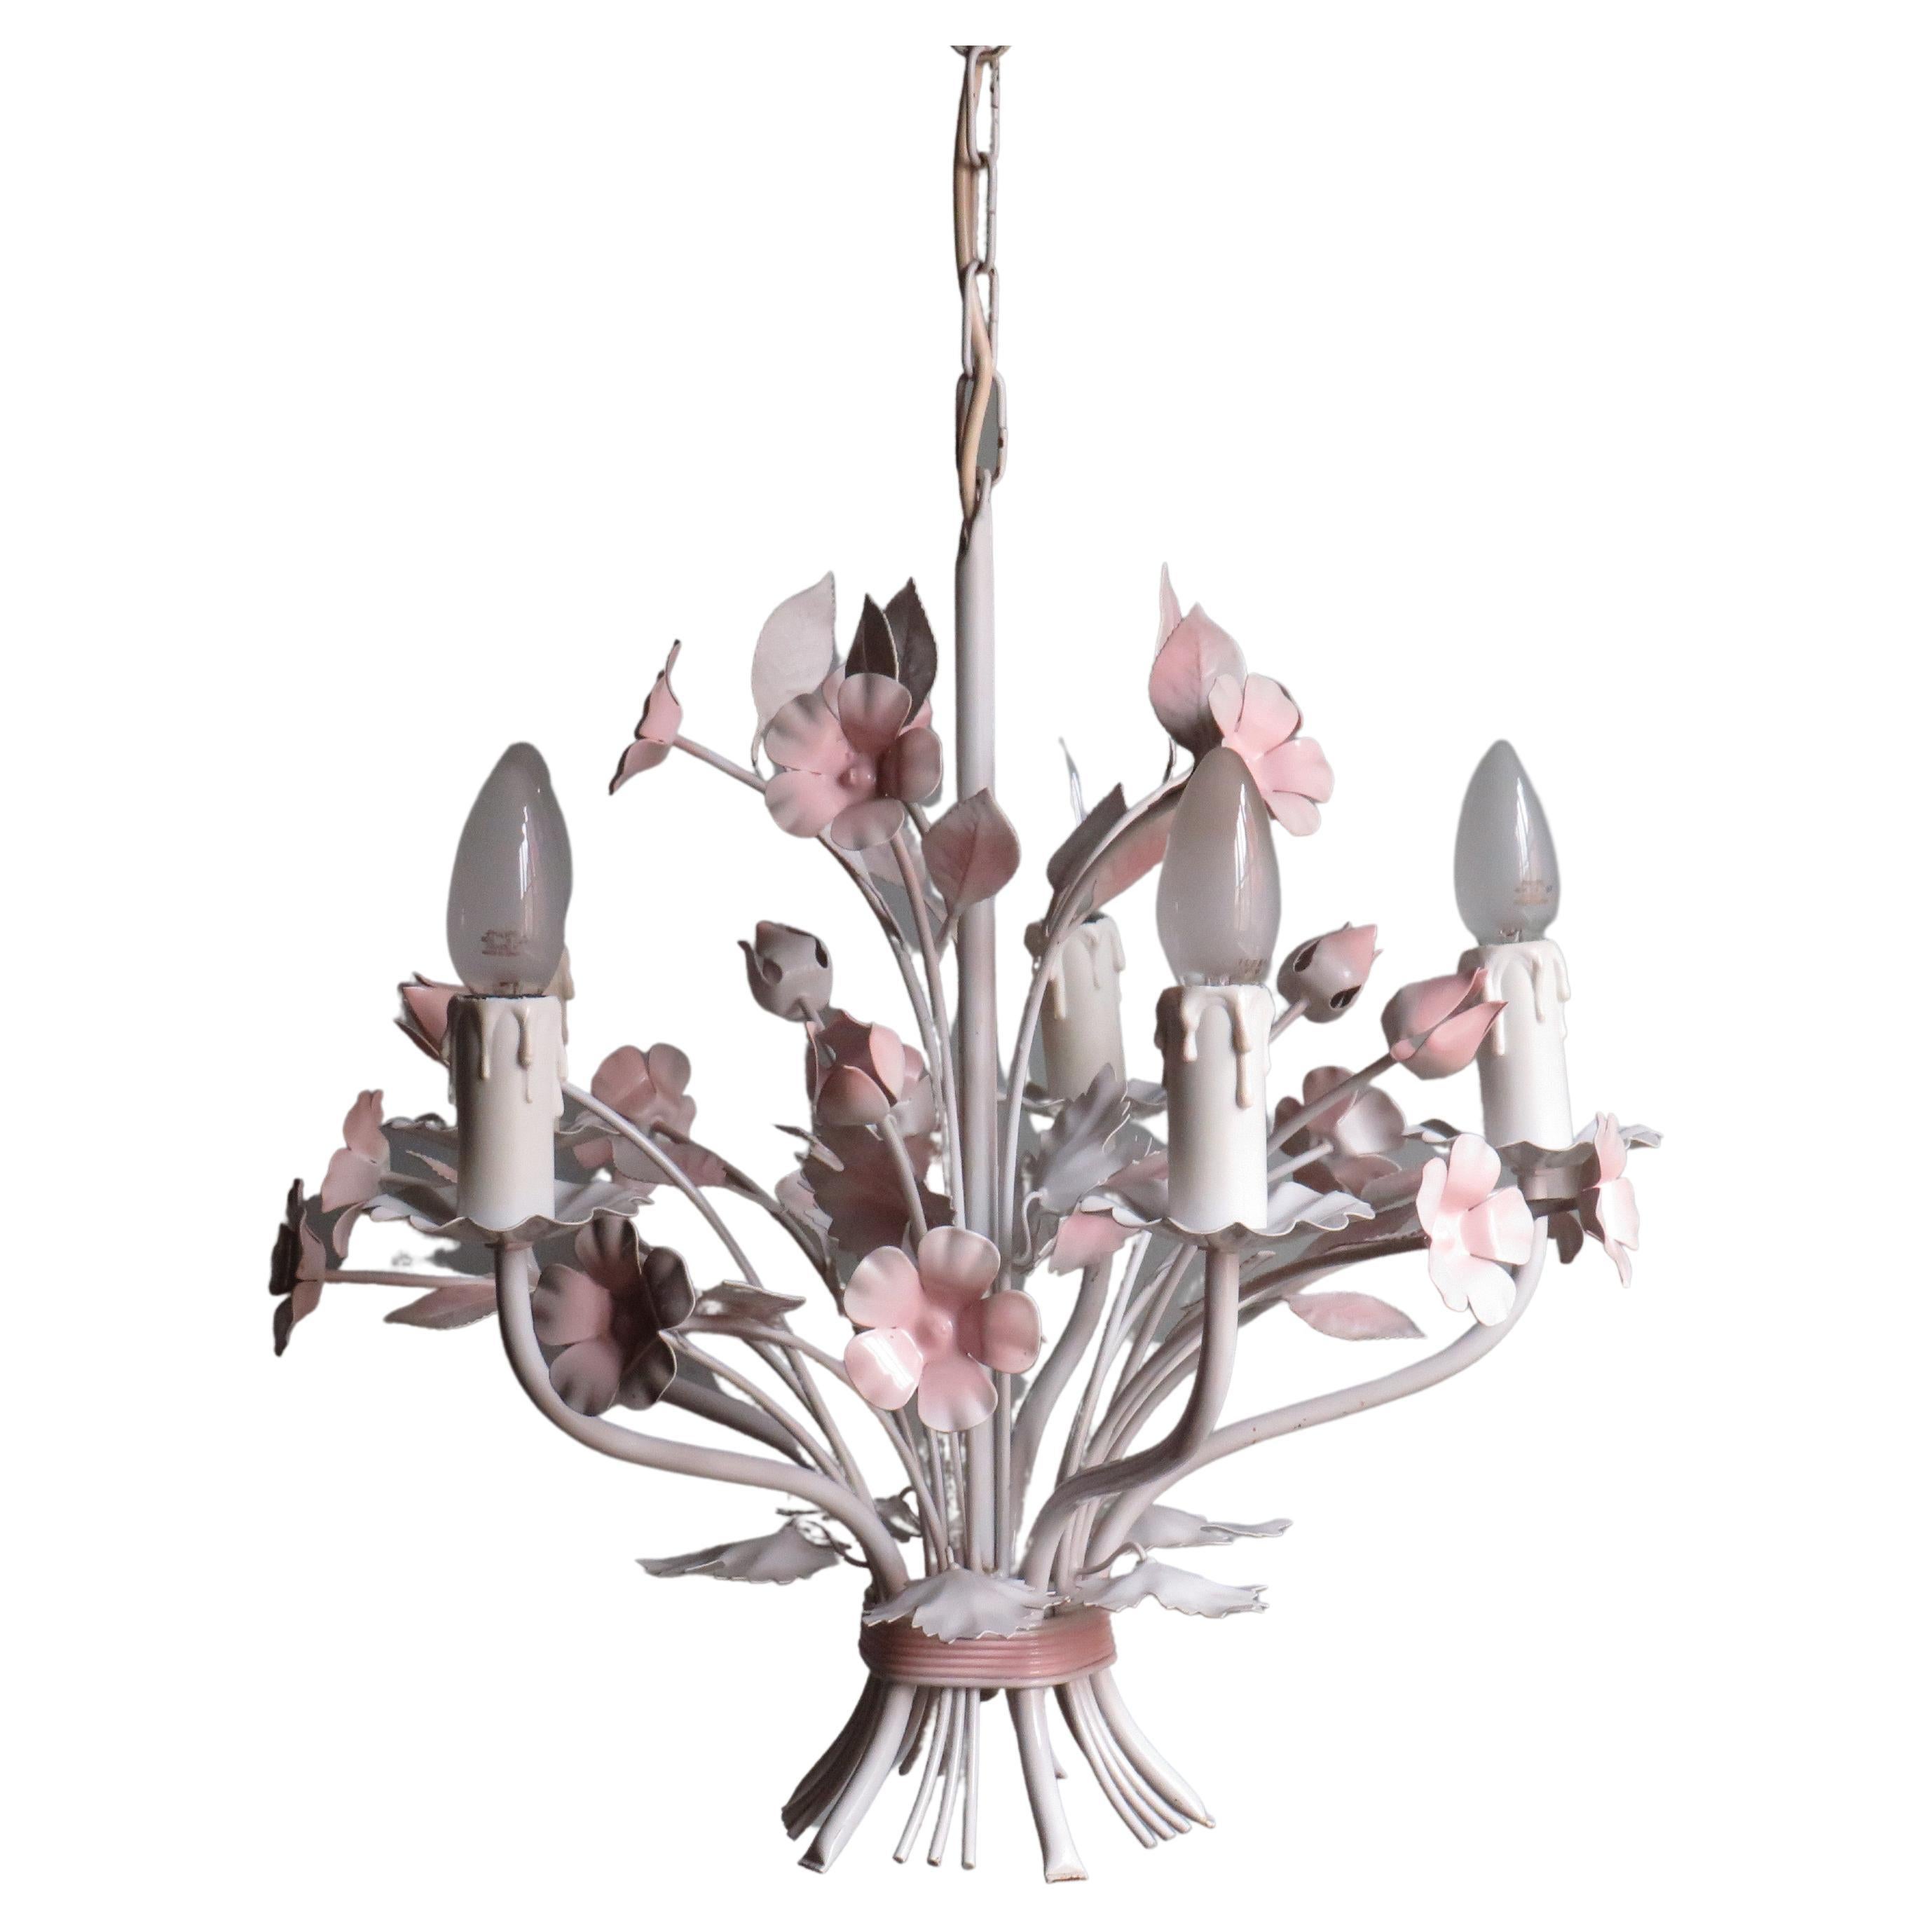 Vintage Toleware Chandelier with Floral Motifs, Italy, 1960s For Sale